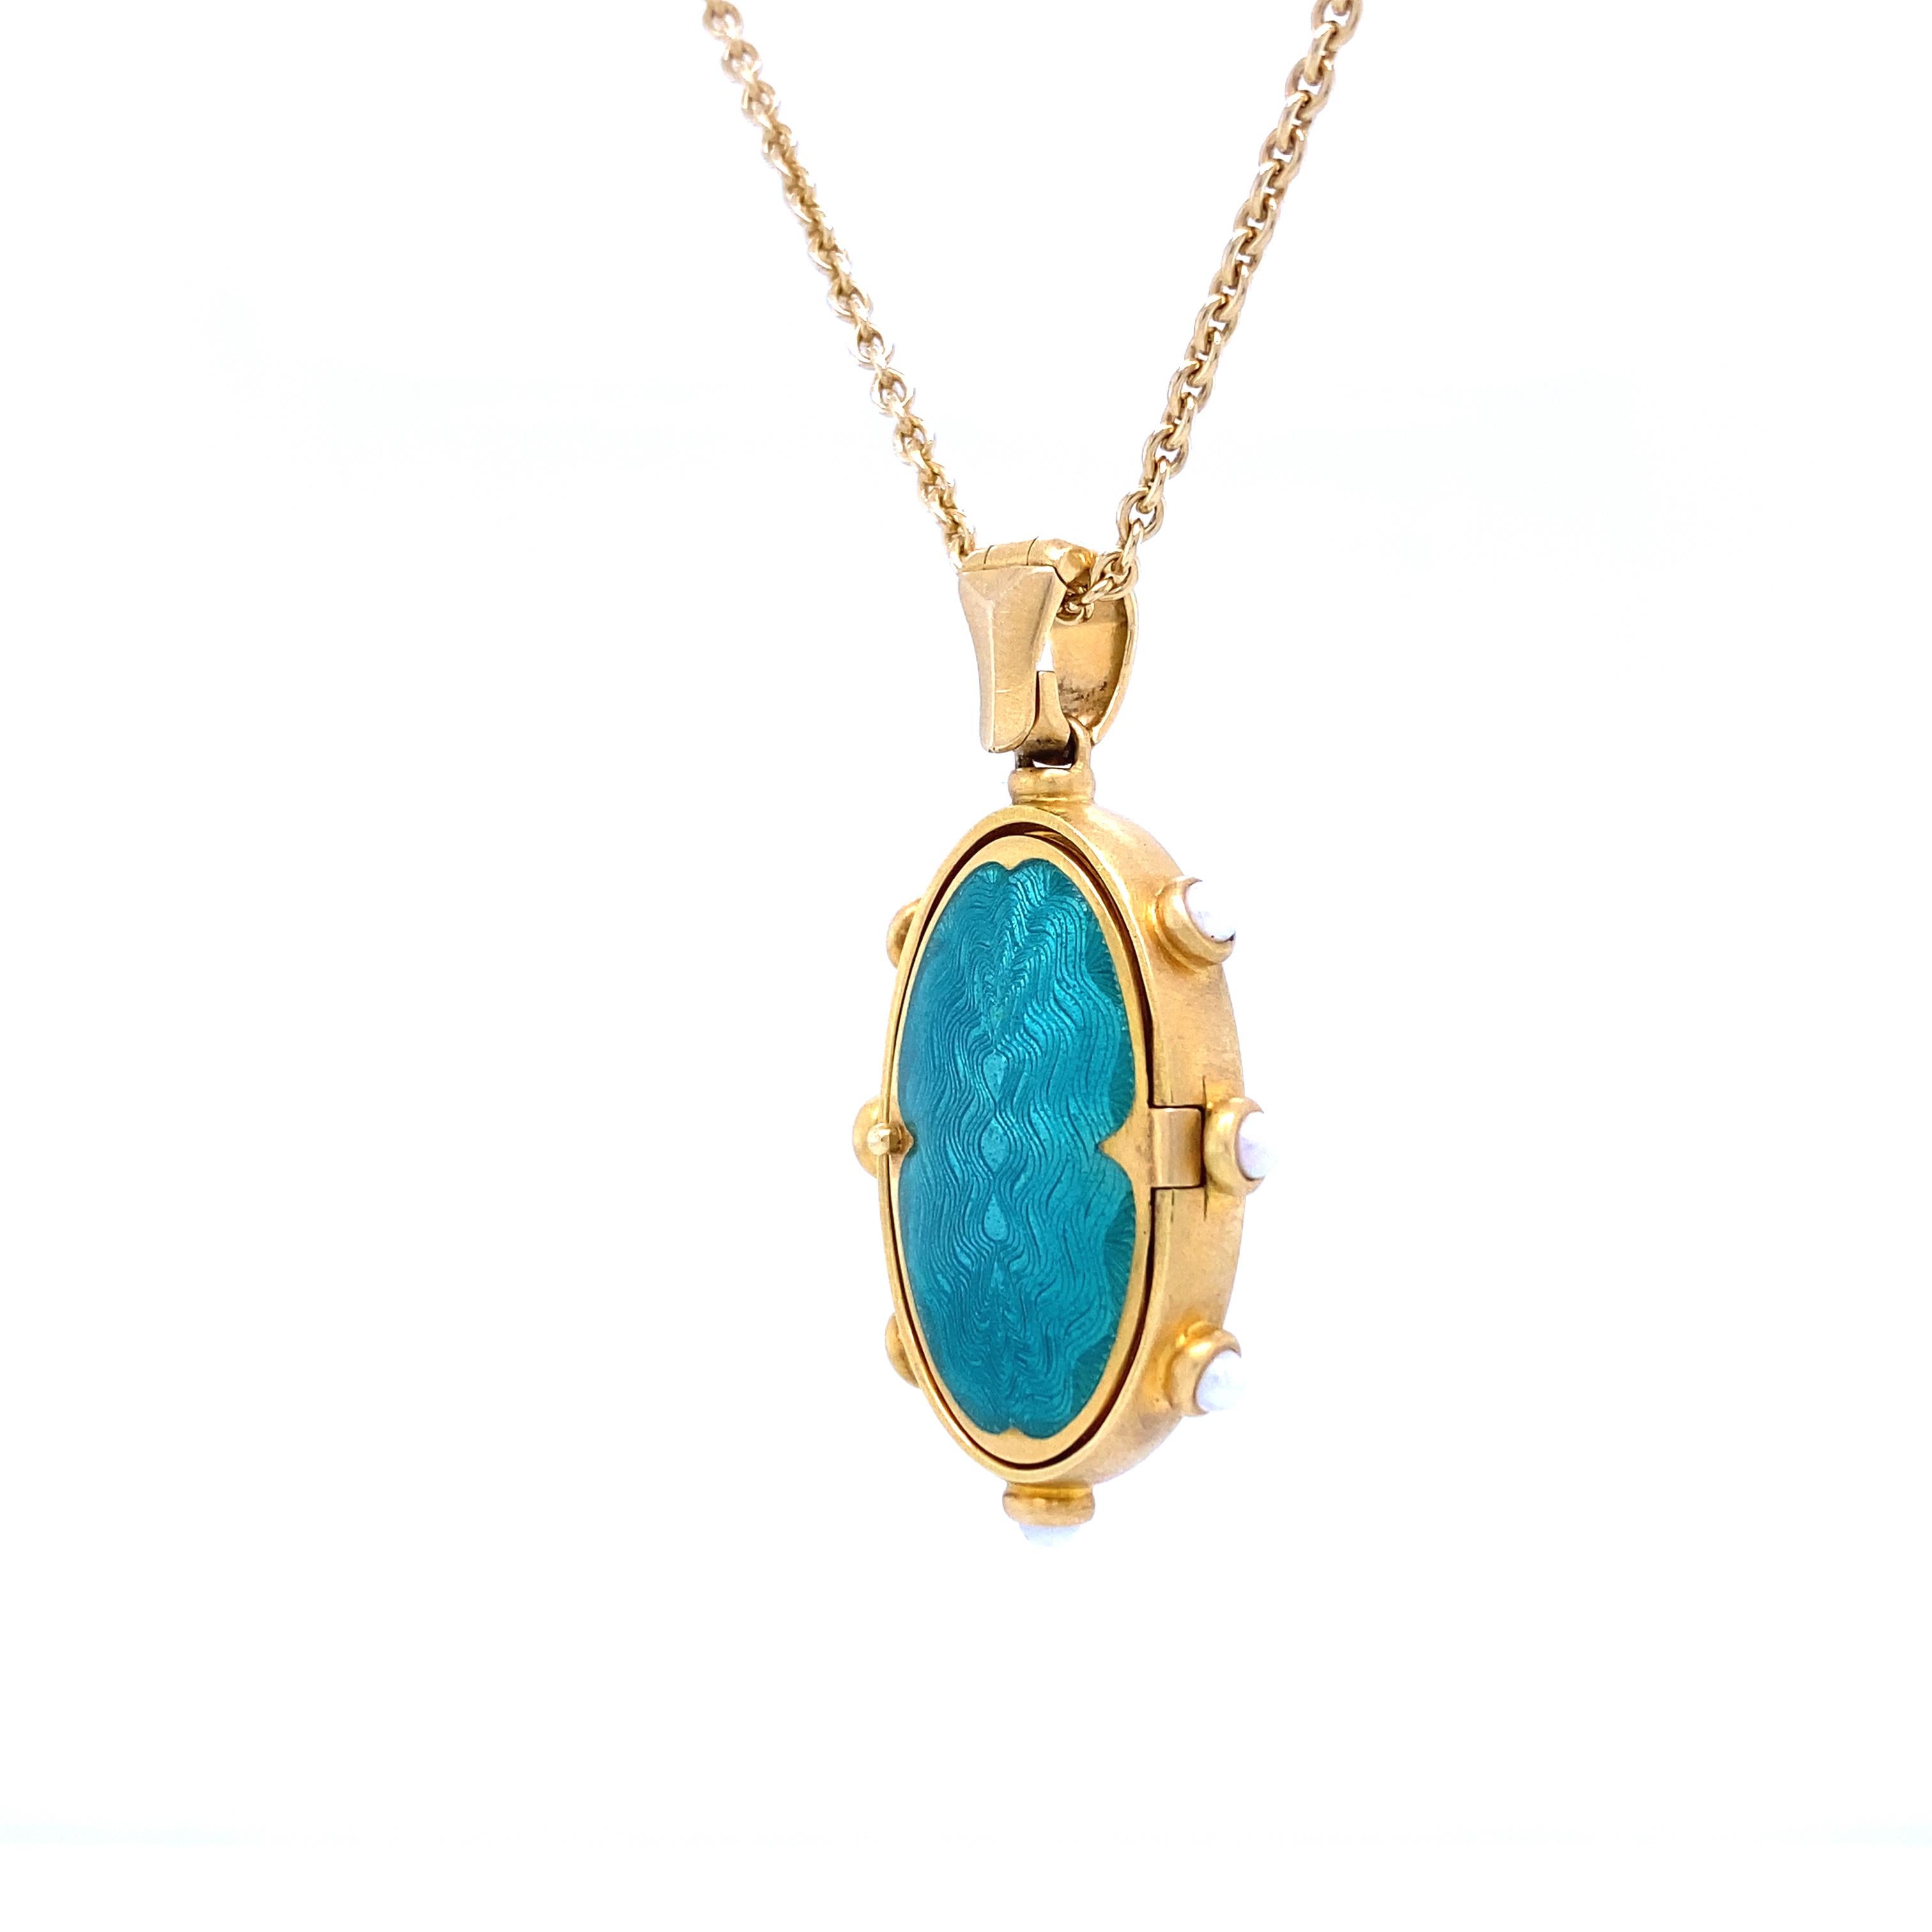 Oval Locket Pendant Necklace 18k Yellow Gold Turquoise Enamel Rubellite & Pearls For Sale 1